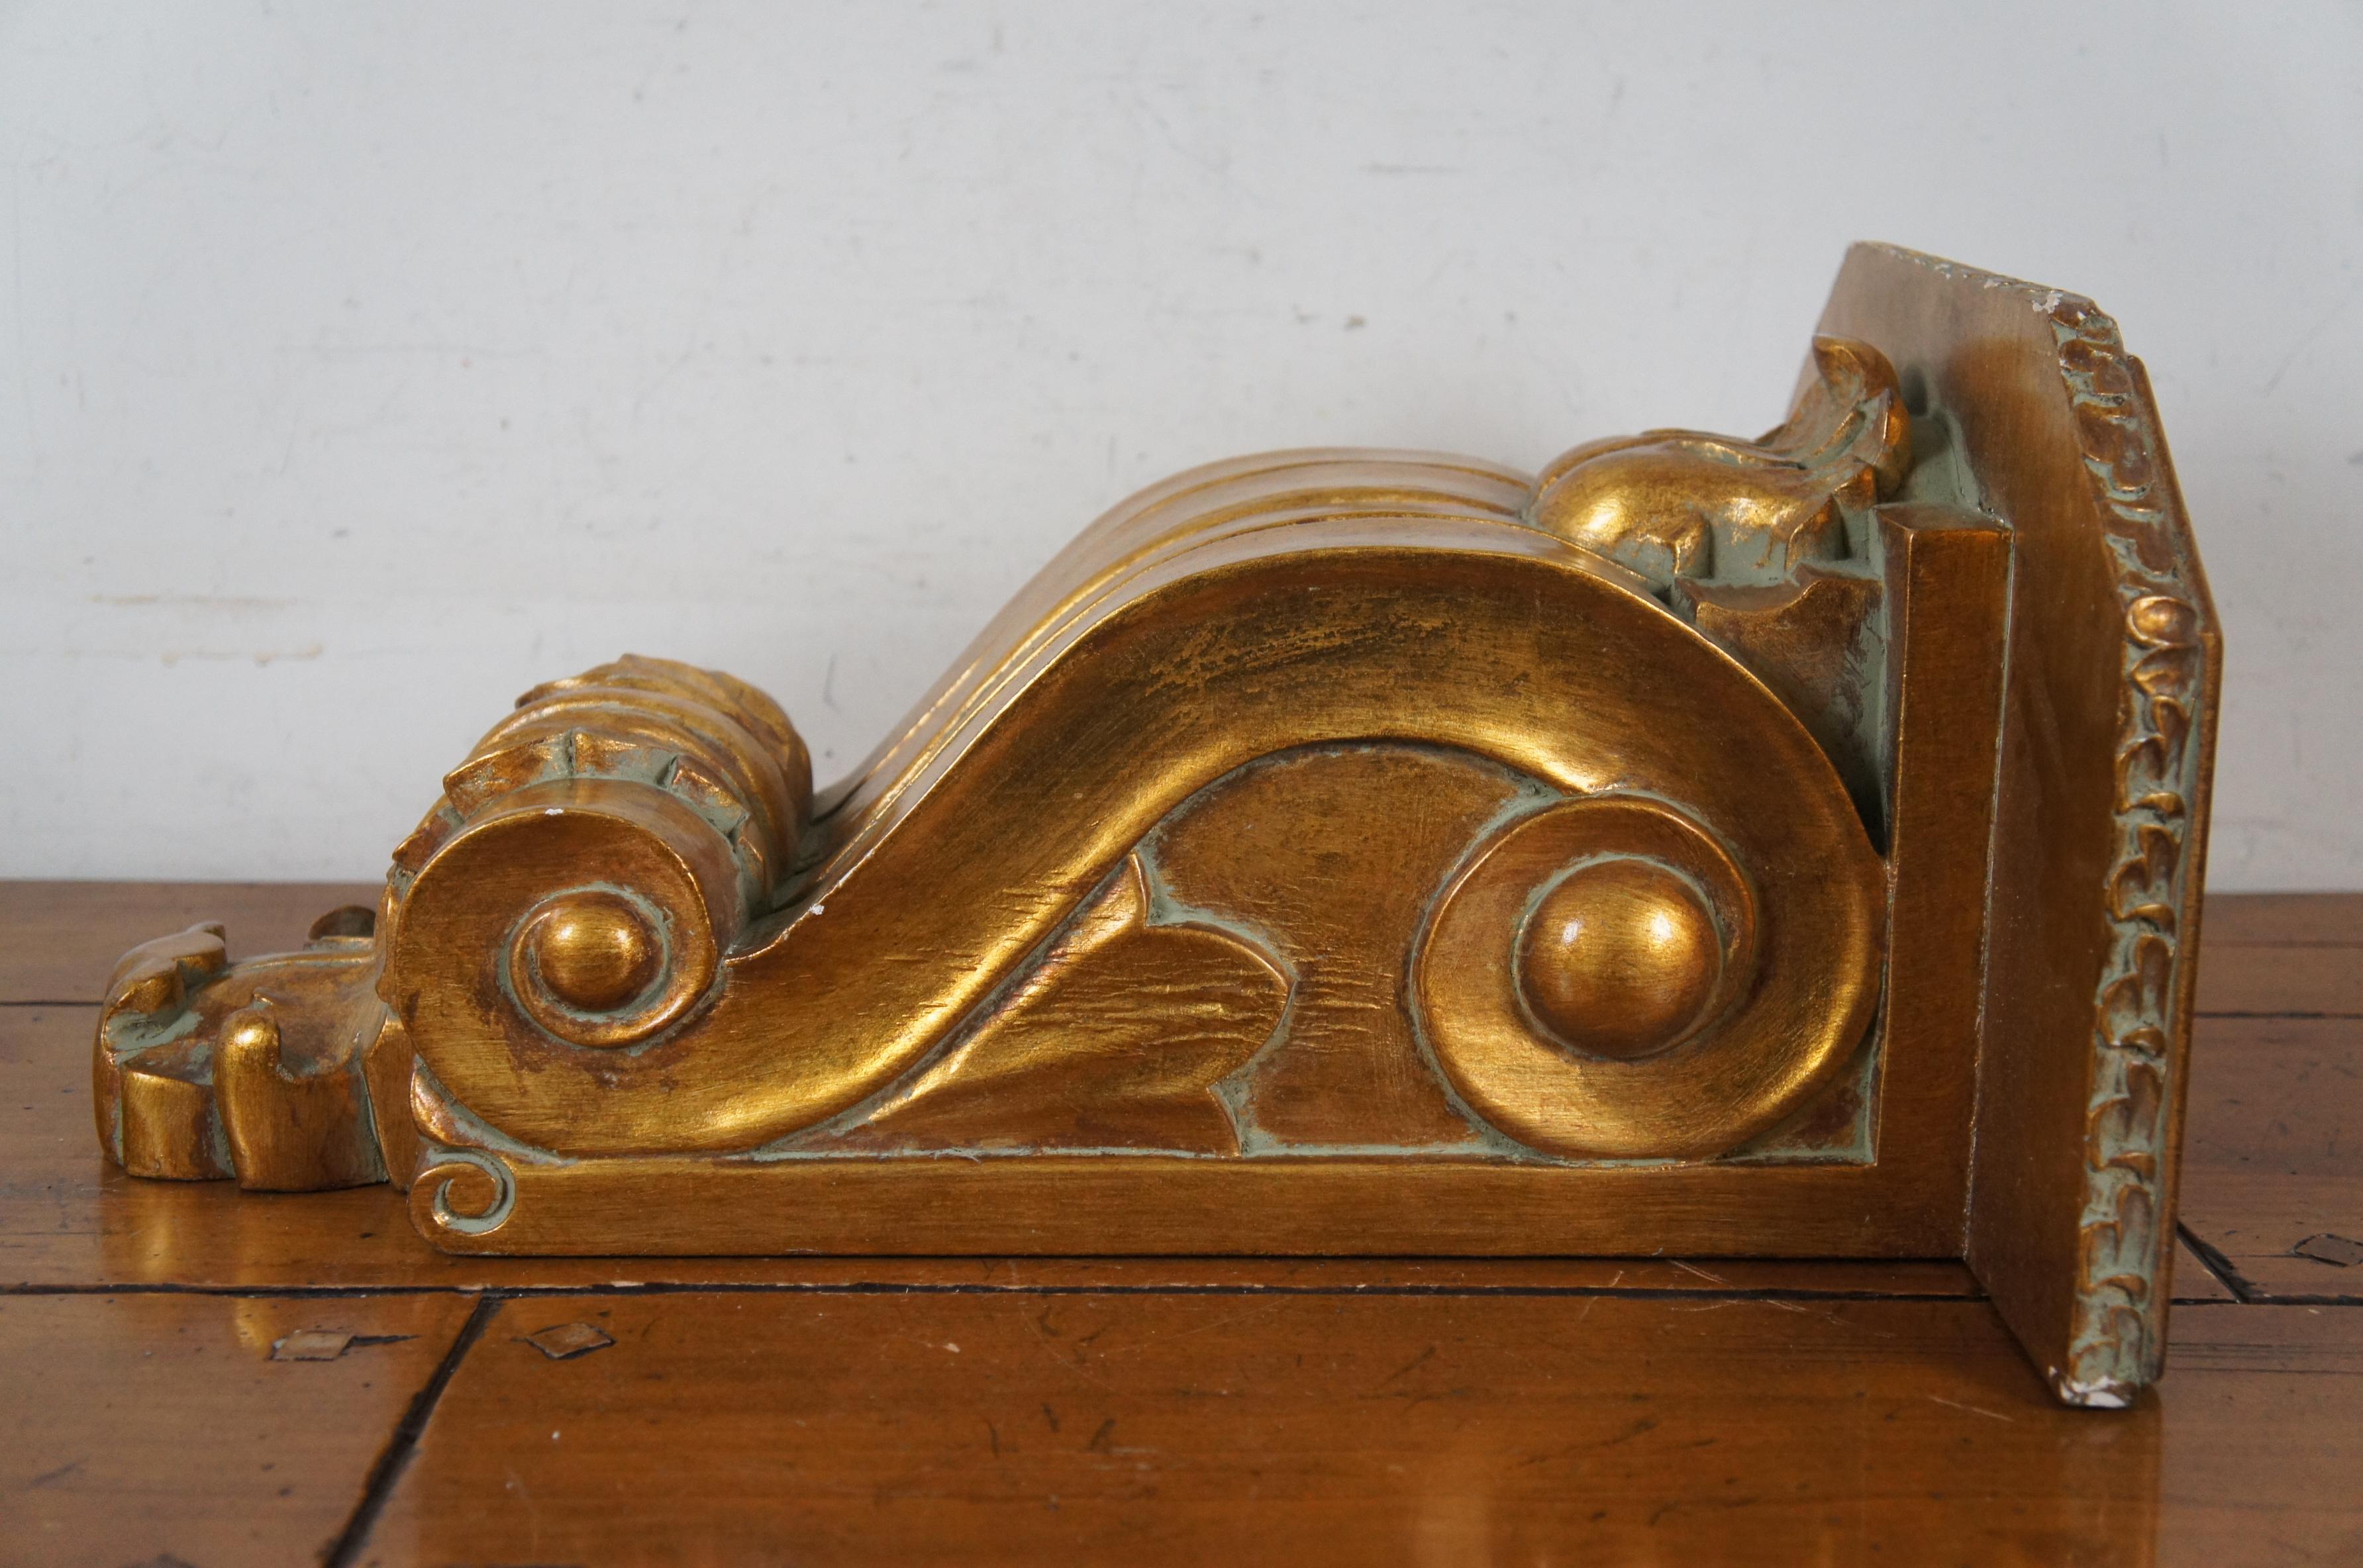 20th Century 2 Large Scrolled Acanthus Gold Gilt Wood Corbel Wall Bracket Sconce Shelves 20